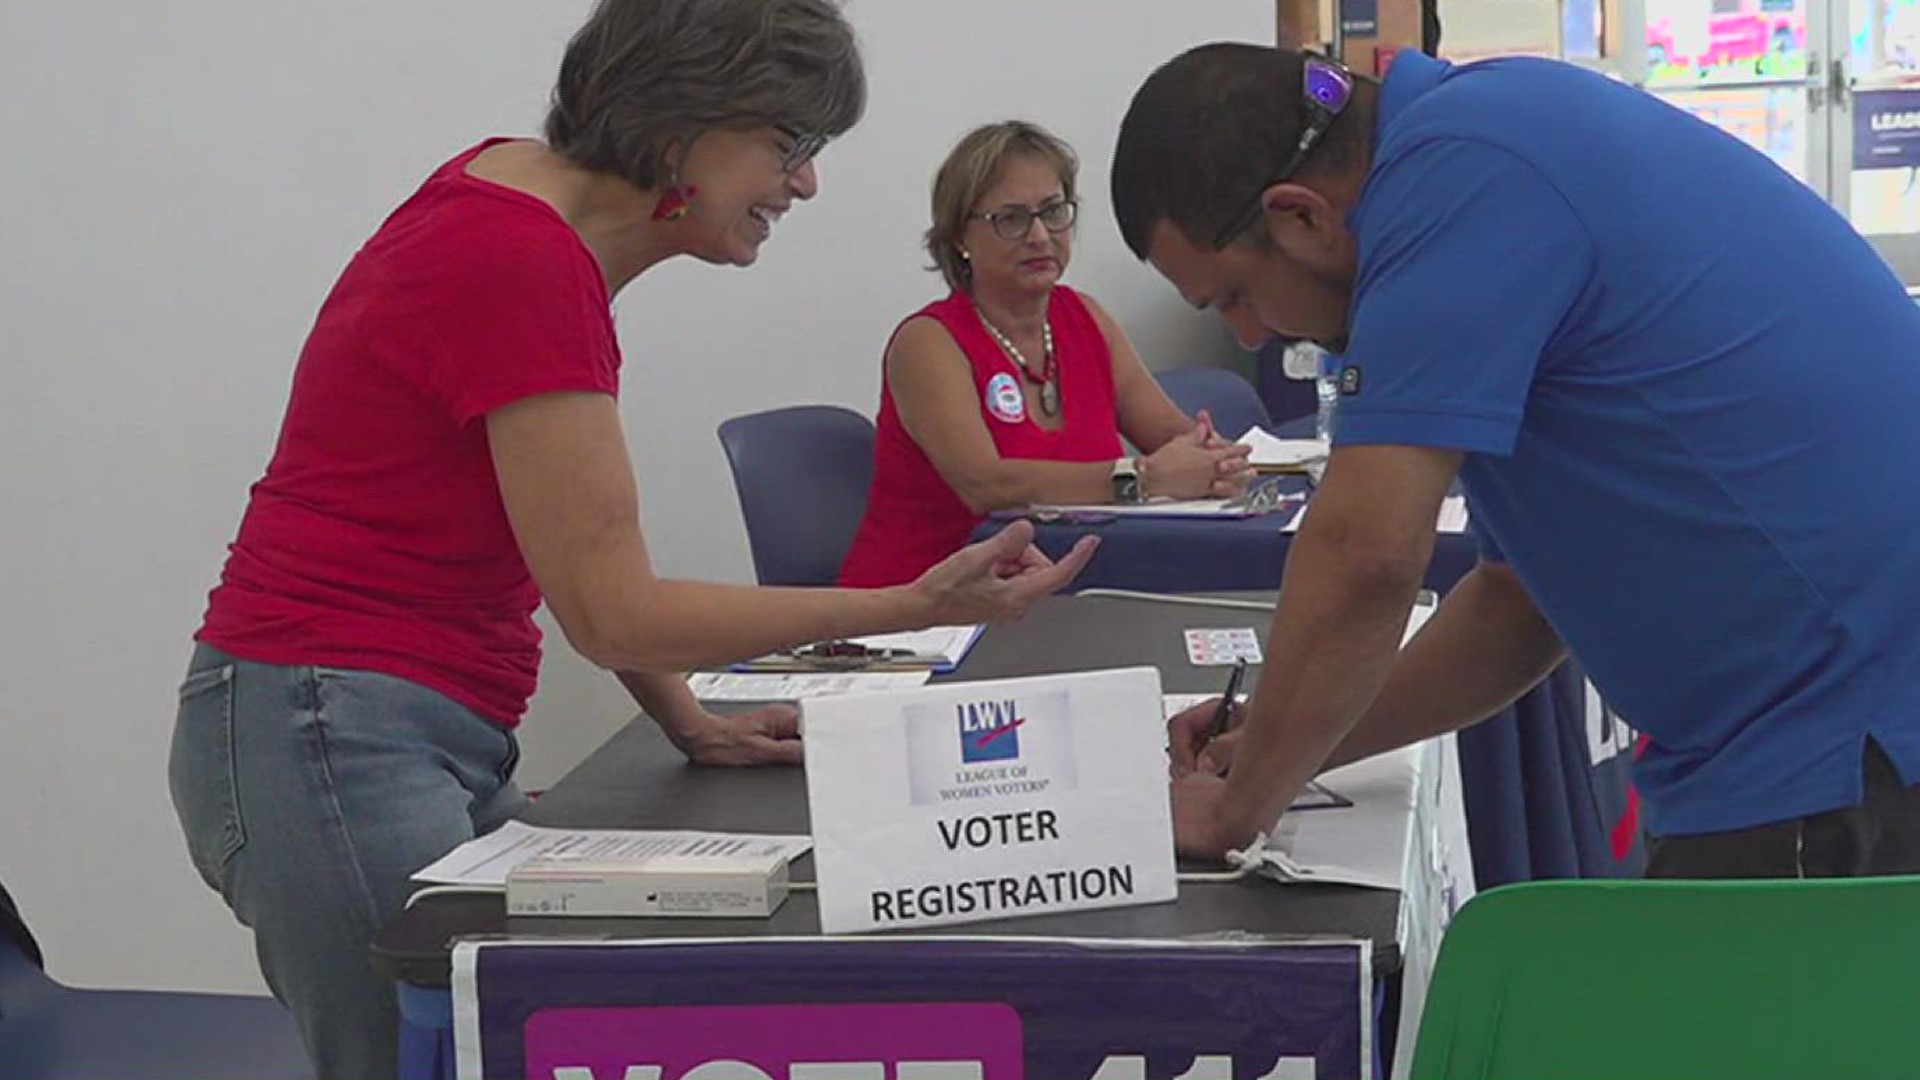 The League of Women Voters(LWV) hopes to see a record number of Nueces County voters at the upcoming midterm election. Early voting begins Oct. 24- Nov. 4.